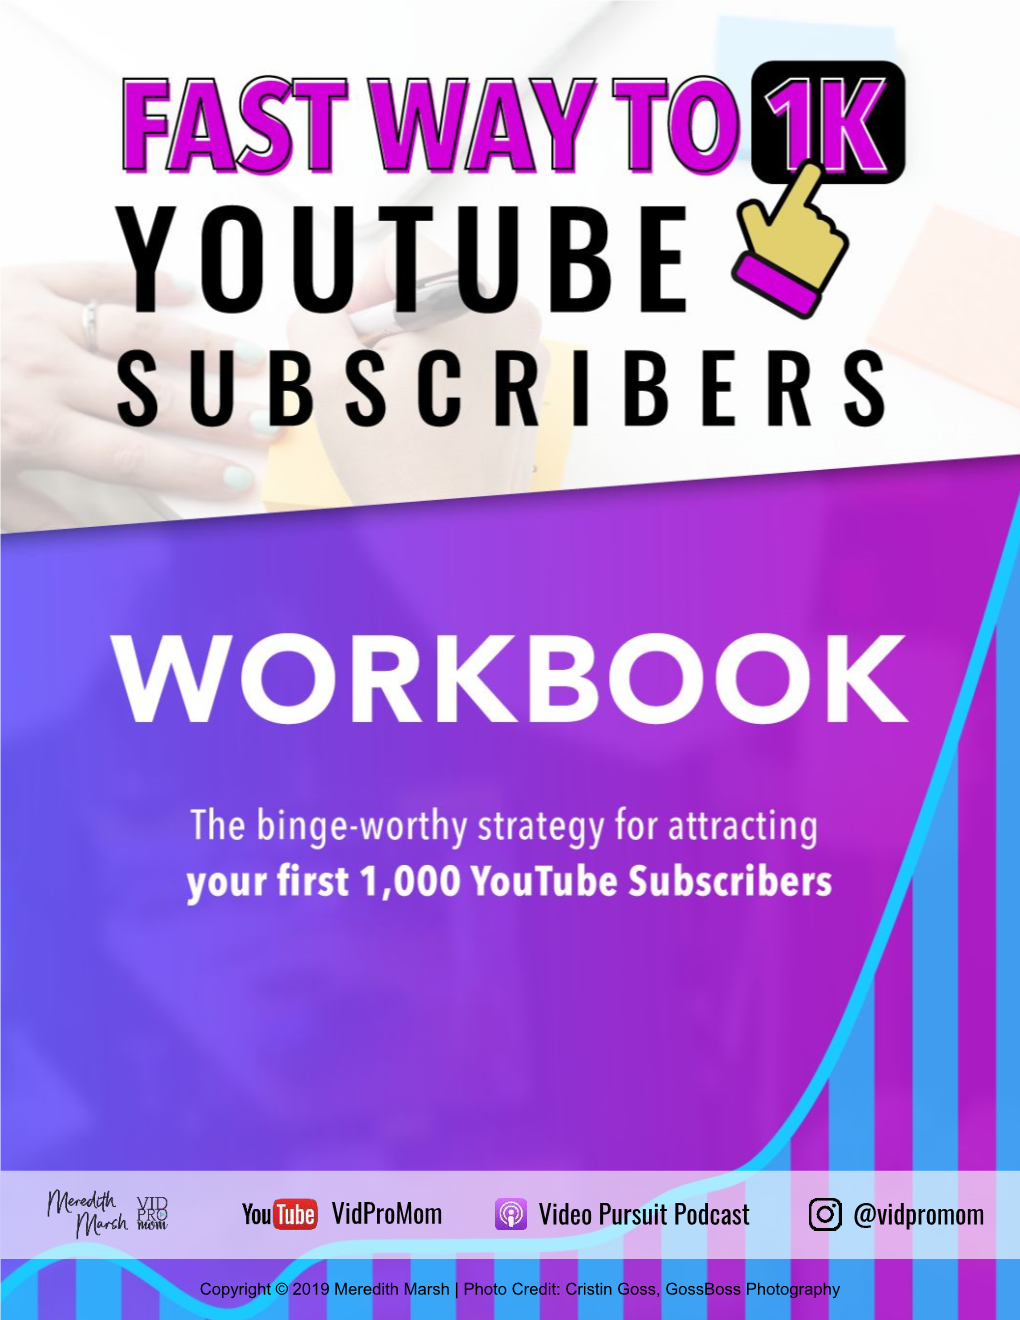 Next Steps to the FAST WAY to 1K Youtube Subscribers